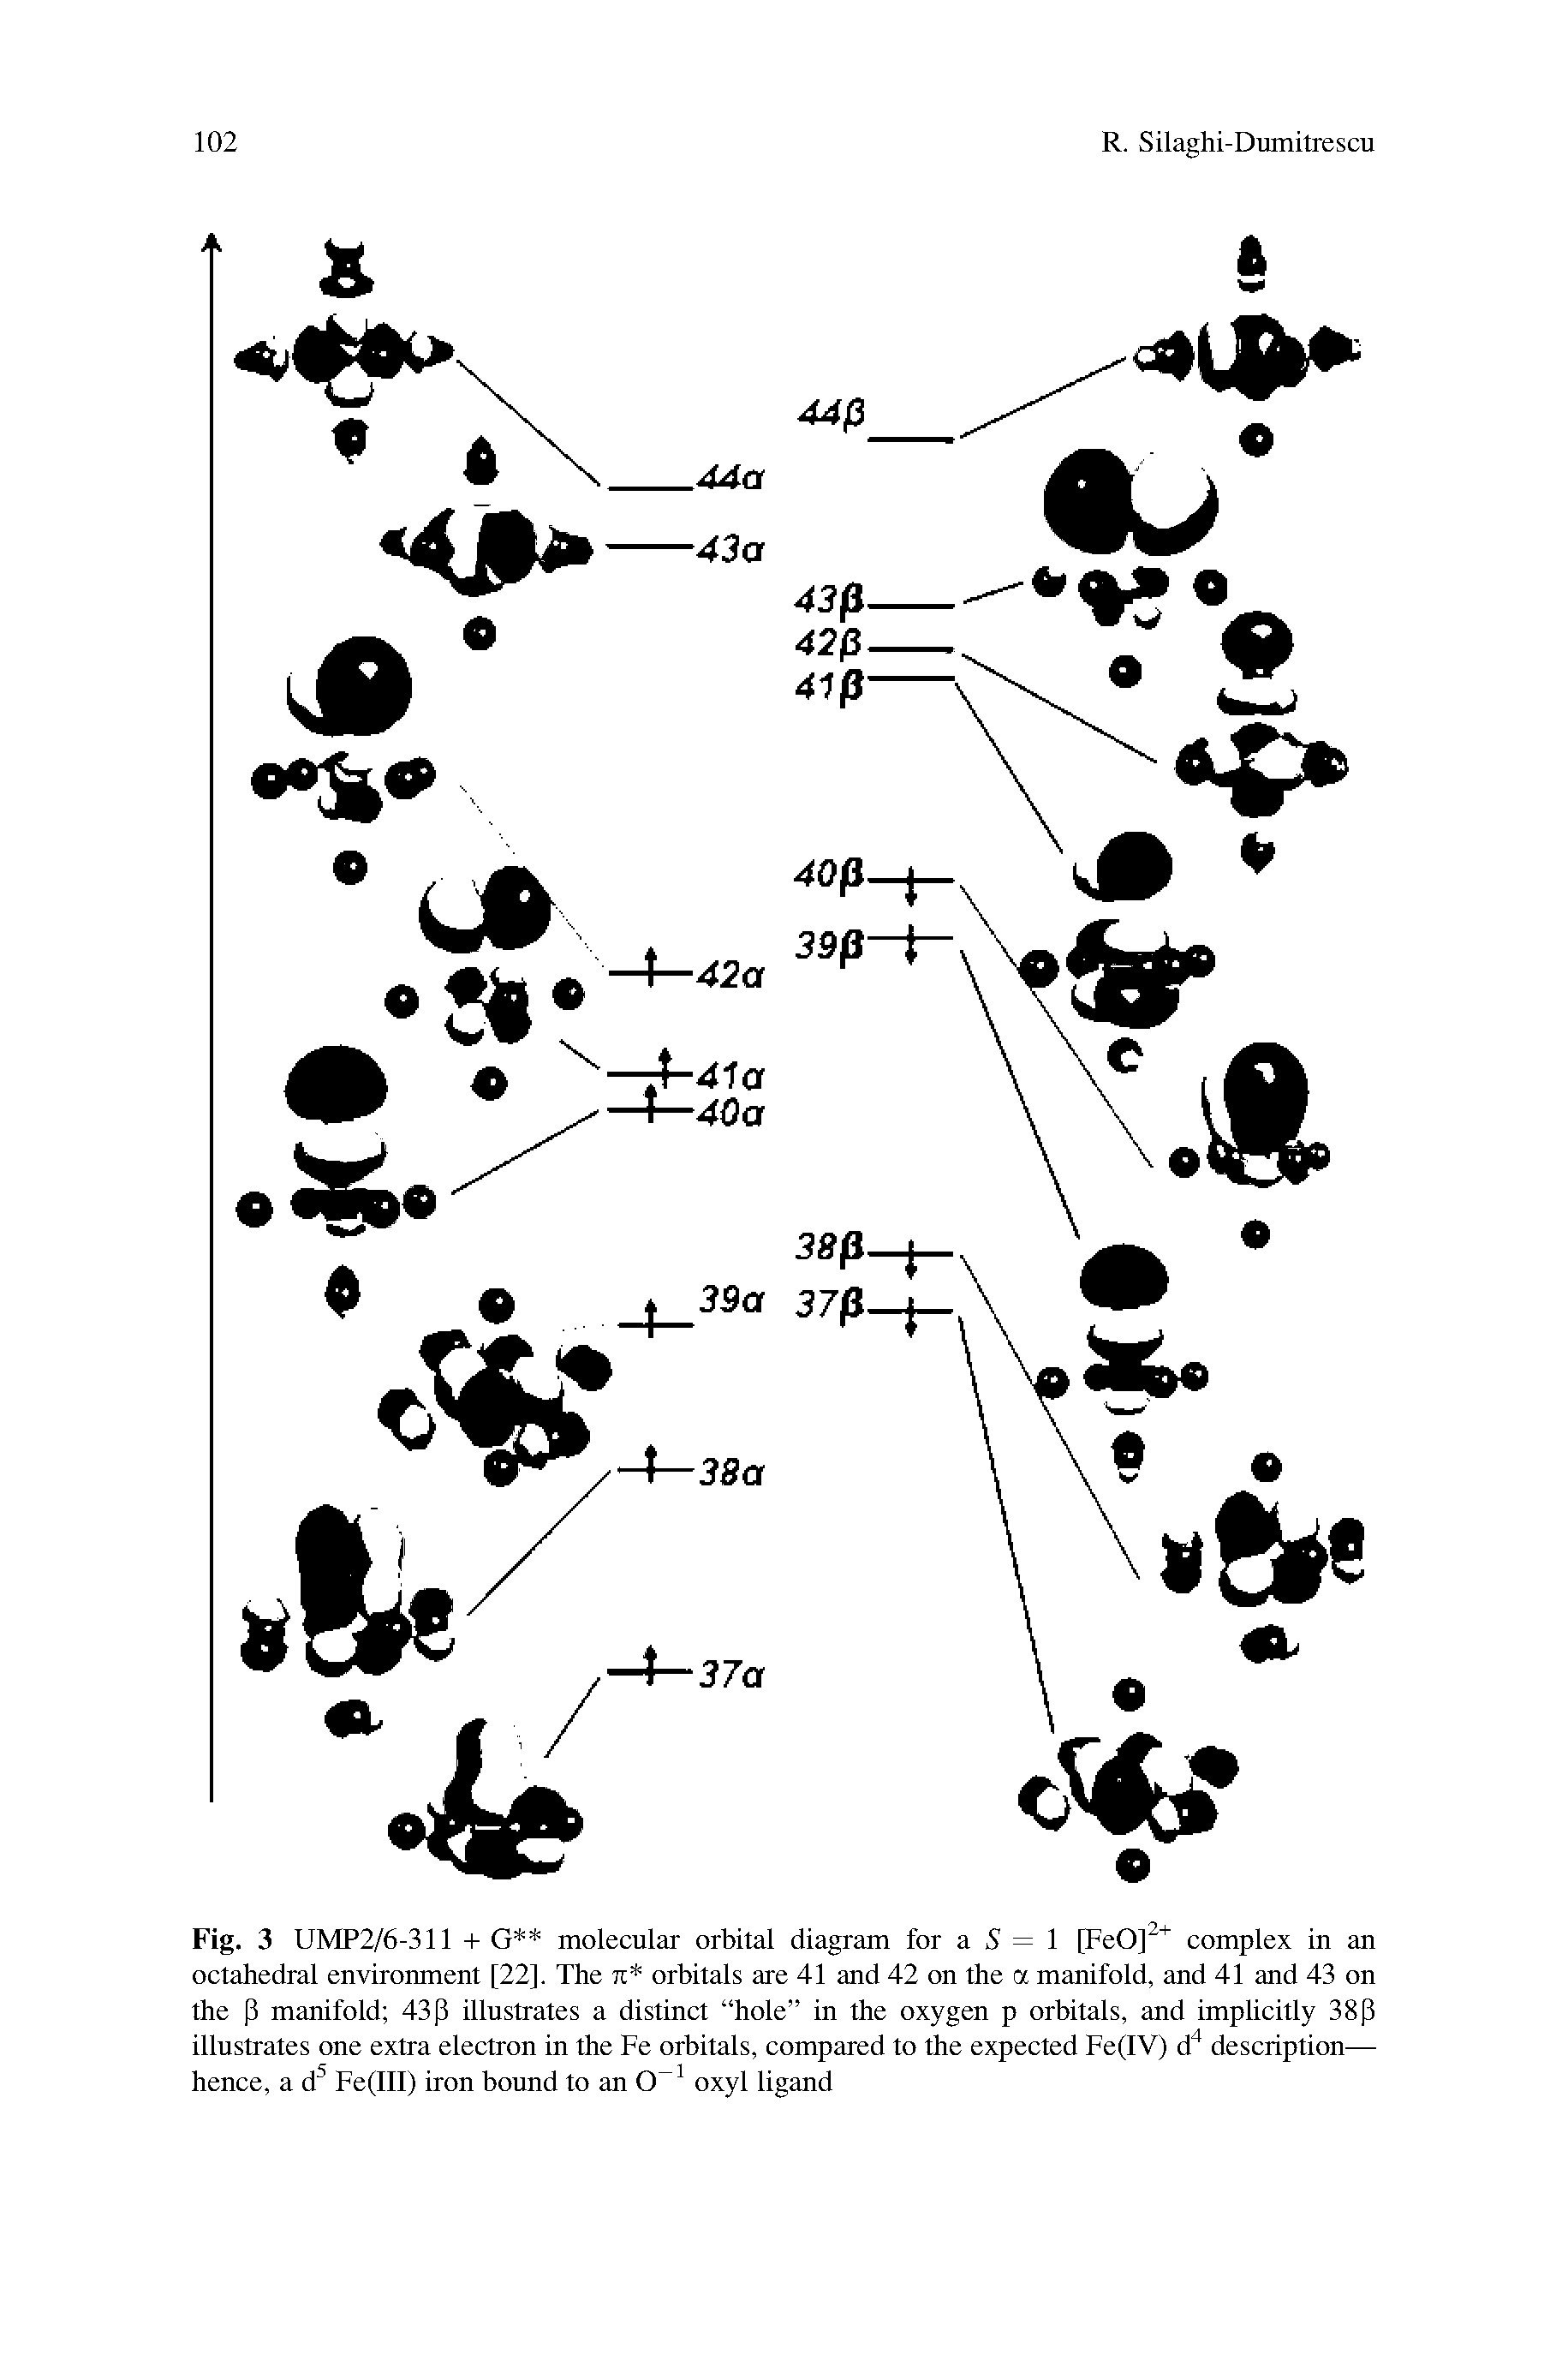 Fig. 3 UMP2/6-311 + G molecular orbital diagram for a 5 = 1 [FeO] complex in an octahedral environment [22], The 7t orbitals are 41 and 42 on the a manifold, and 41 and 43 on the P manifold 43p illustrates a distinct hole in the oxygen p orbitals, and implicitly 38p illustrates one extra electron in the Fe orbitals, compared to the expected Fe(IV) d" description— hence, a d Fe(III) iron bound to an oxyl ligand...